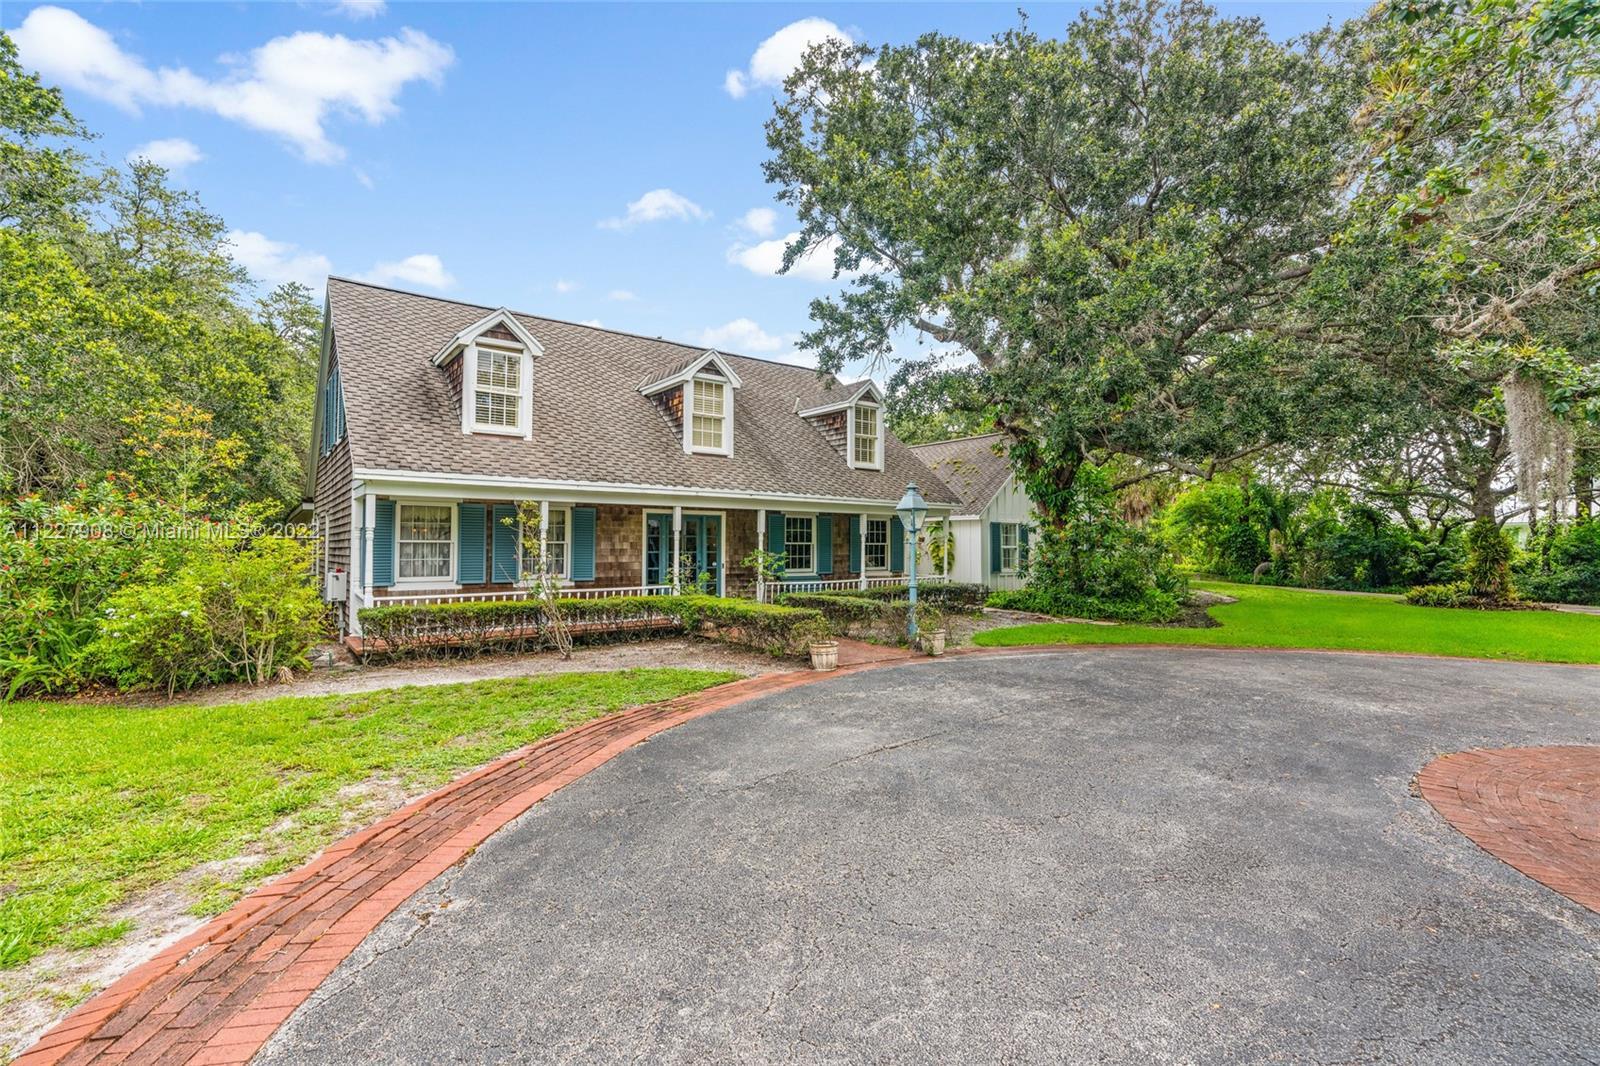 2.5 Acres in the heart of Jupiter. This home boasts wood beams and flooring, sitting room, office, d